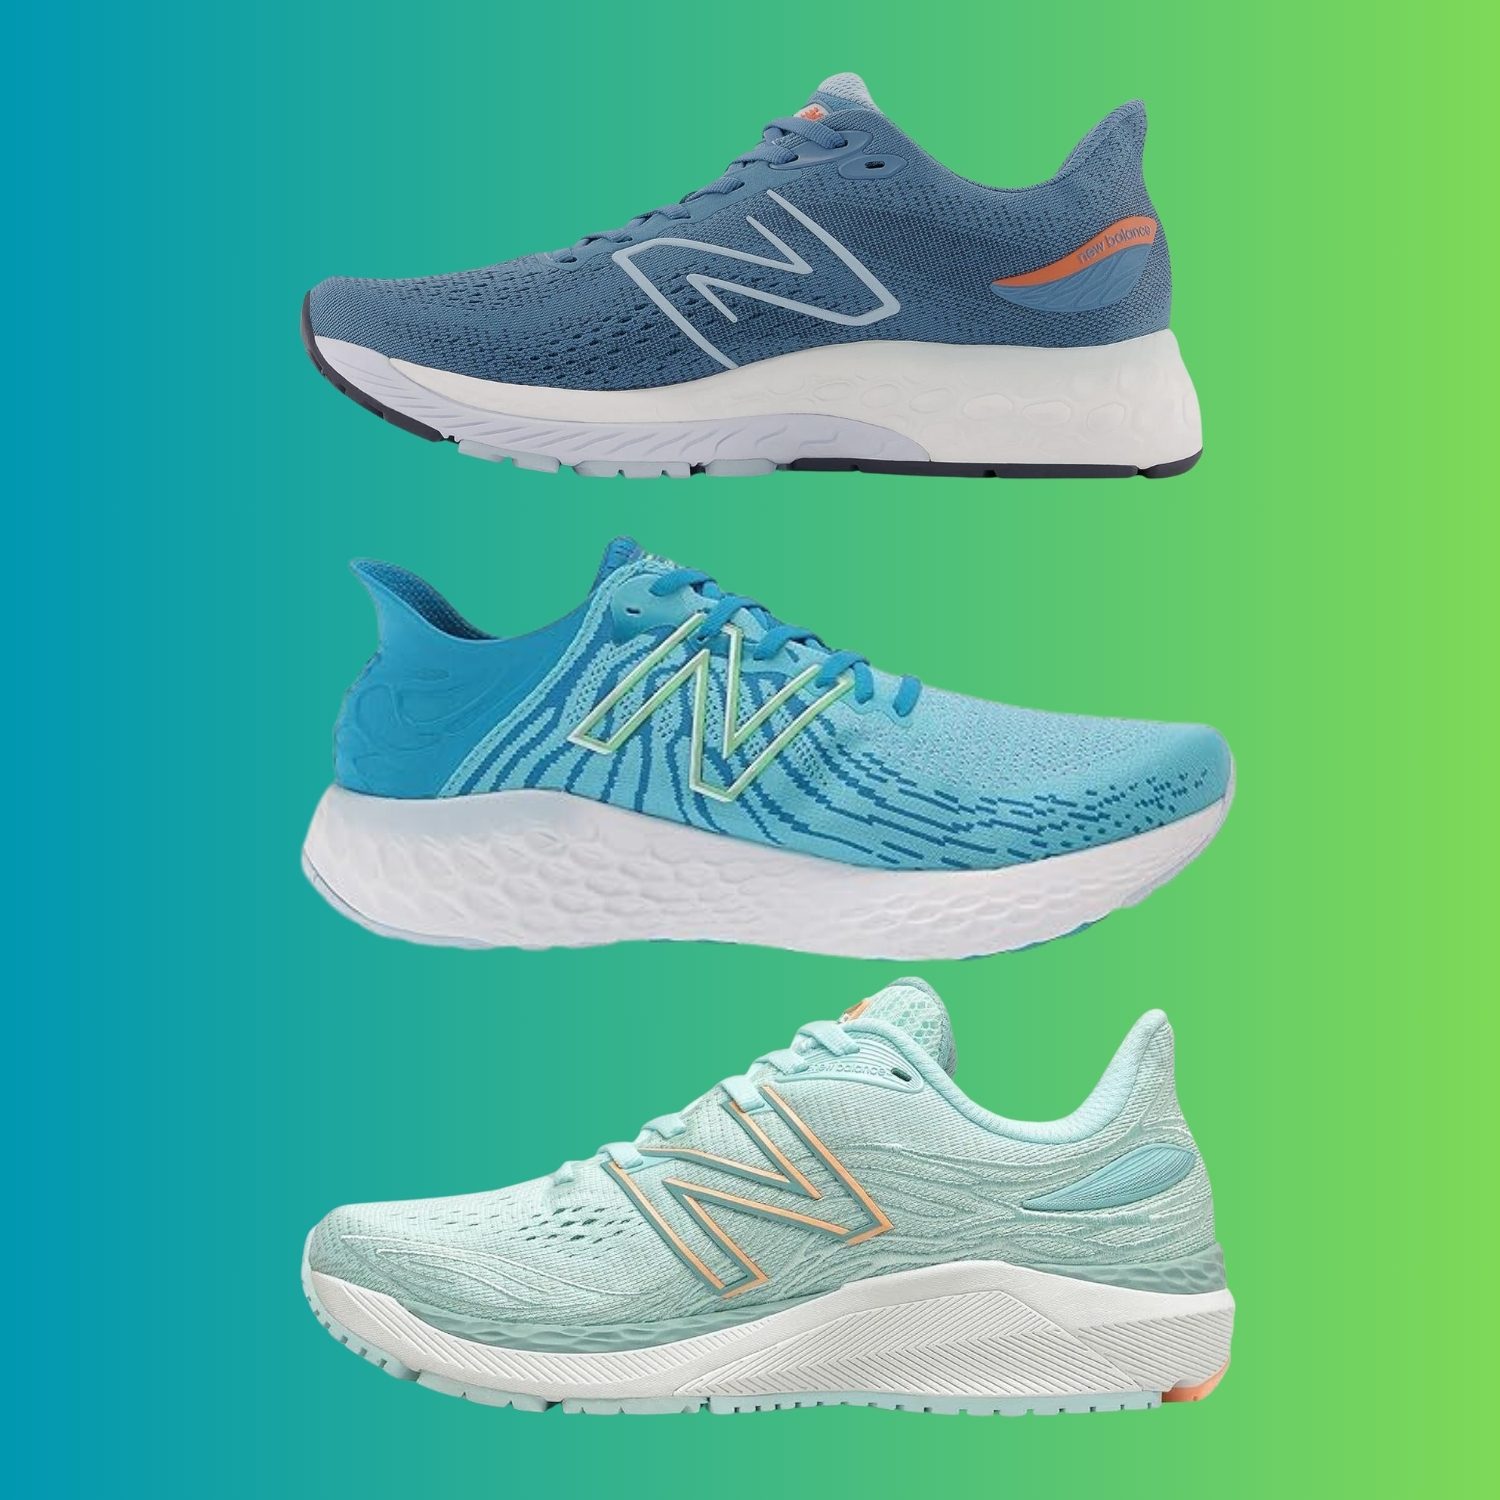 Best New Balance Shoes for Supination